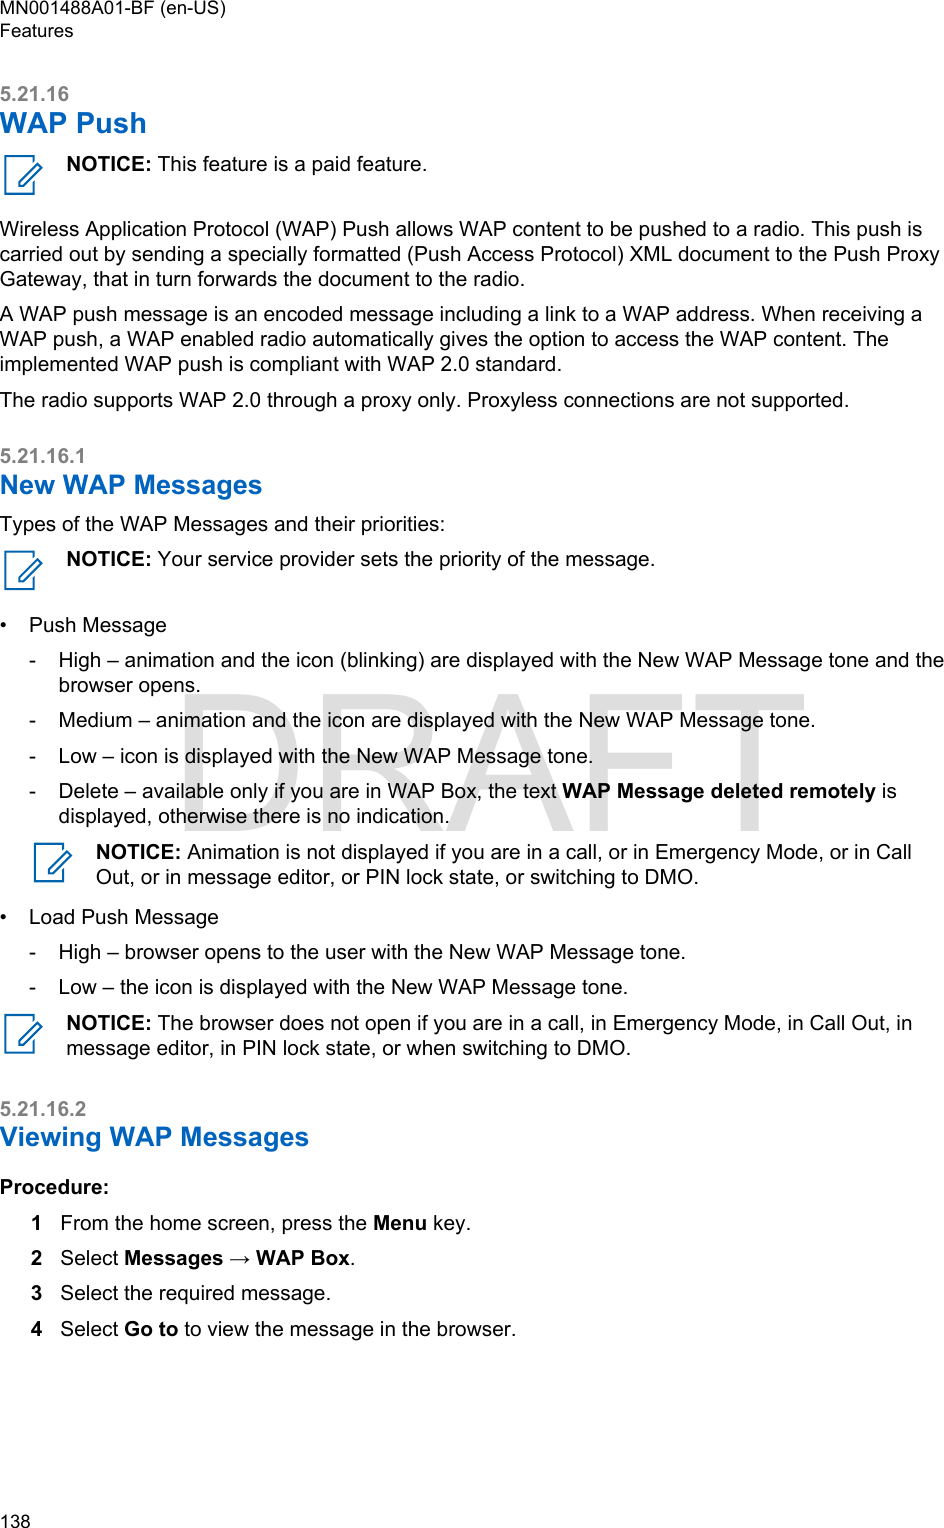 5.21.16WAP PushNOTICE: This feature is a paid feature.Wireless Application Protocol (WAP) Push allows WAP content to be pushed to a radio. This push iscarried out by sending a specially formatted (Push Access Protocol) XML document to the Push ProxyGateway, that in turn forwards the document to the radio.A WAP push message is an encoded message including a link to a WAP address. When receiving aWAP push, a WAP enabled radio automatically gives the option to access the WAP content. Theimplemented WAP push is compliant with WAP 2.0 standard.The radio supports WAP 2.0 through a proxy only. Proxyless connections are not supported.5.21.16.1New WAP MessagesTypes of the WAP Messages and their priorities:NOTICE: Your service provider sets the priority of the message.• Push Message-High – animation and the icon (blinking) are displayed with the New WAP Message tone and thebrowser opens.- Medium – animation and the icon are displayed with the New WAP Message tone.- Low – icon is displayed with the New WAP Message tone.- Delete – available only if you are in WAP Box, the text WAP Message deleted remotely isdisplayed, otherwise there is no indication.NOTICE: Animation is not displayed if you are in a call, or in Emergency Mode, or in CallOut, or in message editor, or PIN lock state, or switching to DMO.• Load Push Message-High – browser opens to the user with the New WAP Message tone.- Low – the icon is displayed with the New WAP Message tone.NOTICE: The browser does not open if you are in a call, in Emergency Mode, in Call Out, inmessage editor, in PIN lock state, or when switching to DMO.5.21.16.2Viewing WAP MessagesProcedure:1From the home screen, press the Menu key.2Select Messages → WAP Box.3Select the required message.4Select Go to to view the message in the browser.MN001488A01-BF (en-US)Features138  DRAFT